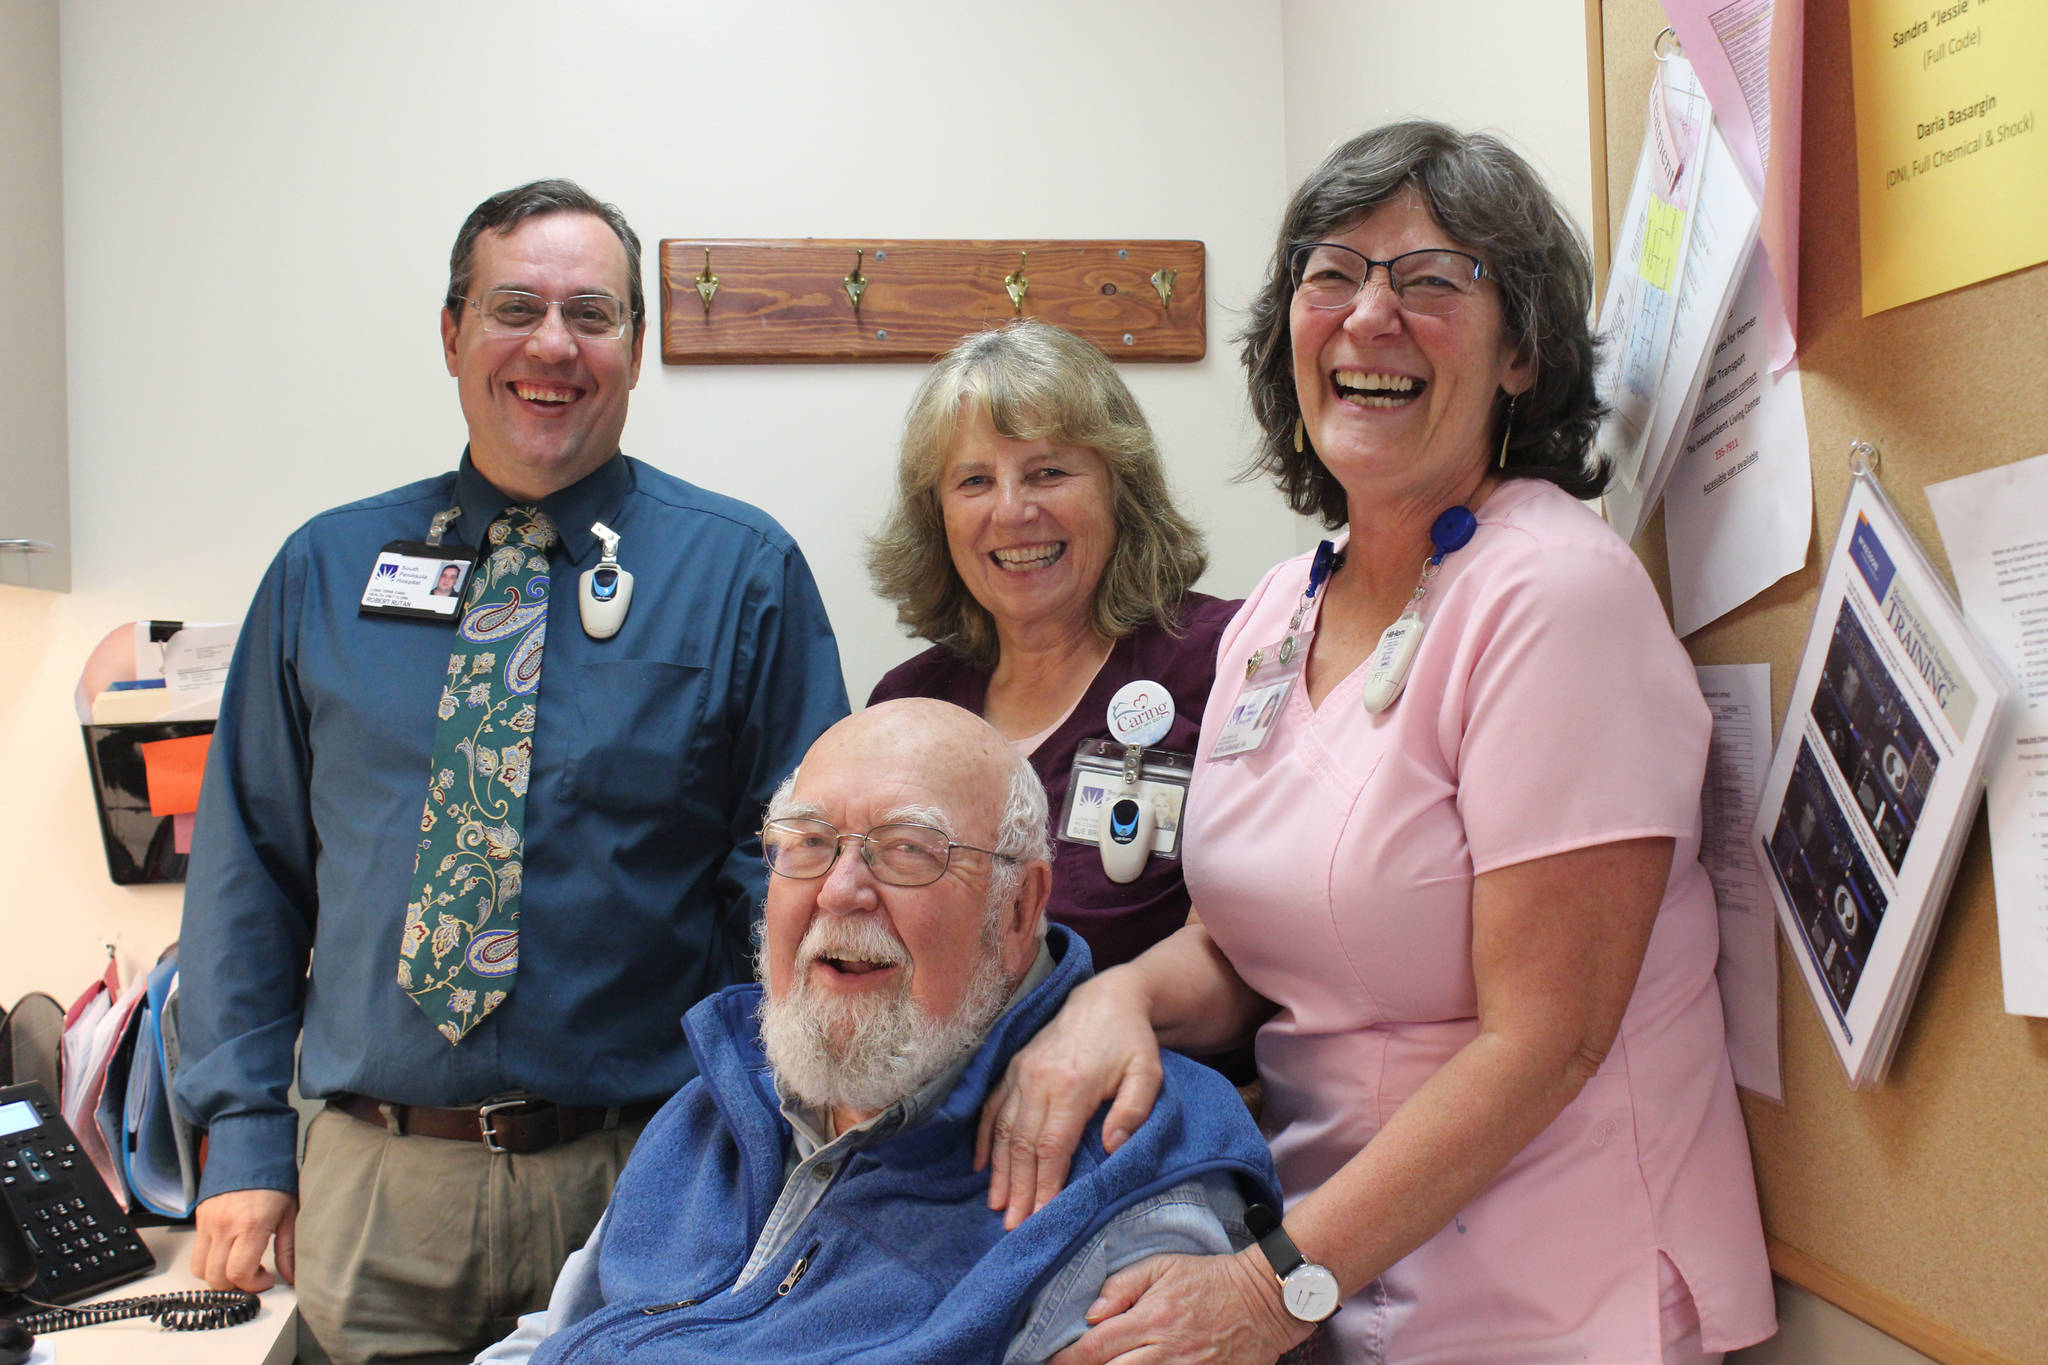 Dr. Paul Eneboe, front, with South Peninsula Hospital Long Term Care staff, from left to right, Robert Rutan, Sue Brooks and Ruth Lavrakas. (Photo by McKibben Jackinsky)